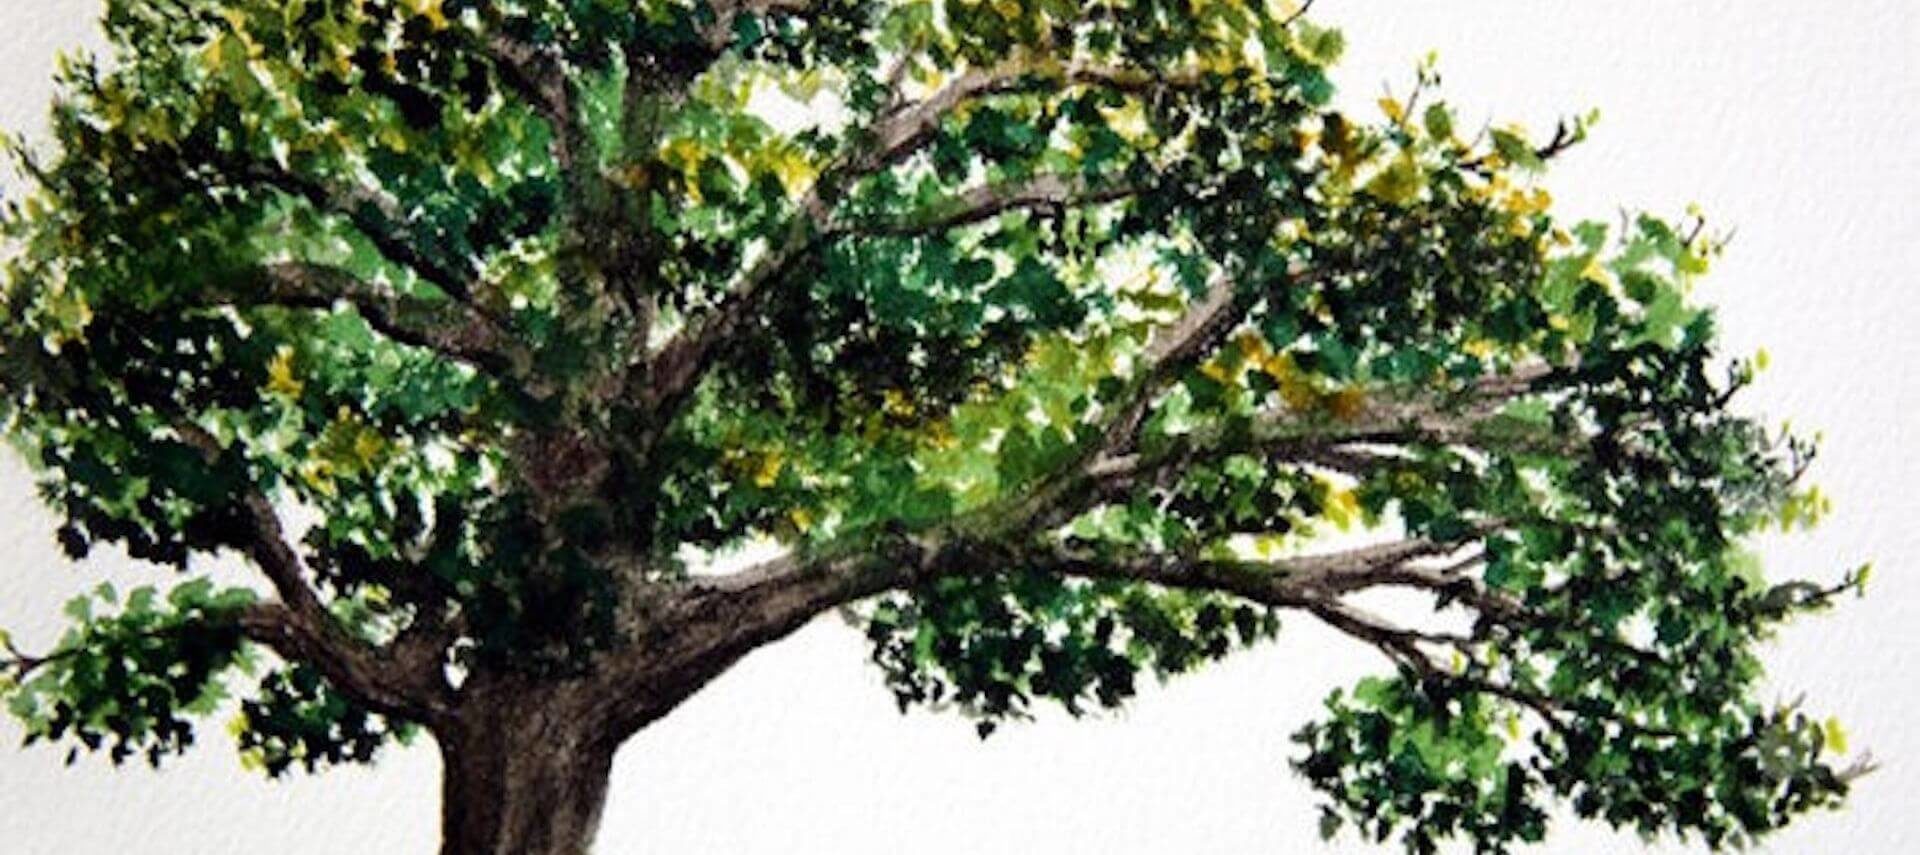 a painting of a oak tree with various shades of green leaves